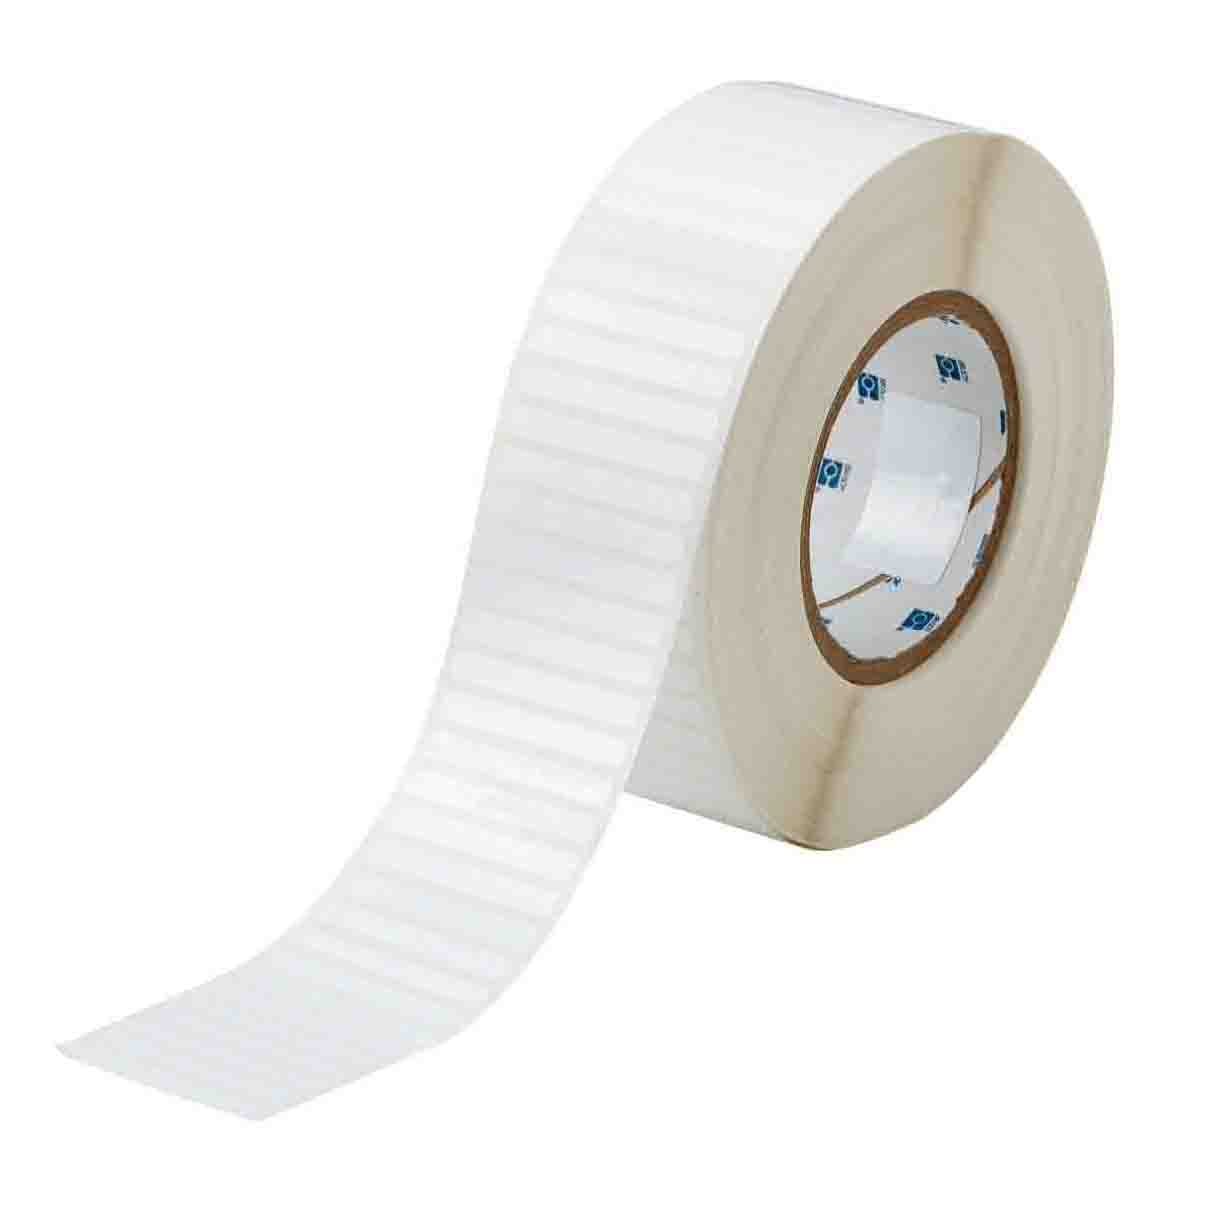 Glossy Polyester Labels .25x2" White 10,000 per Roll